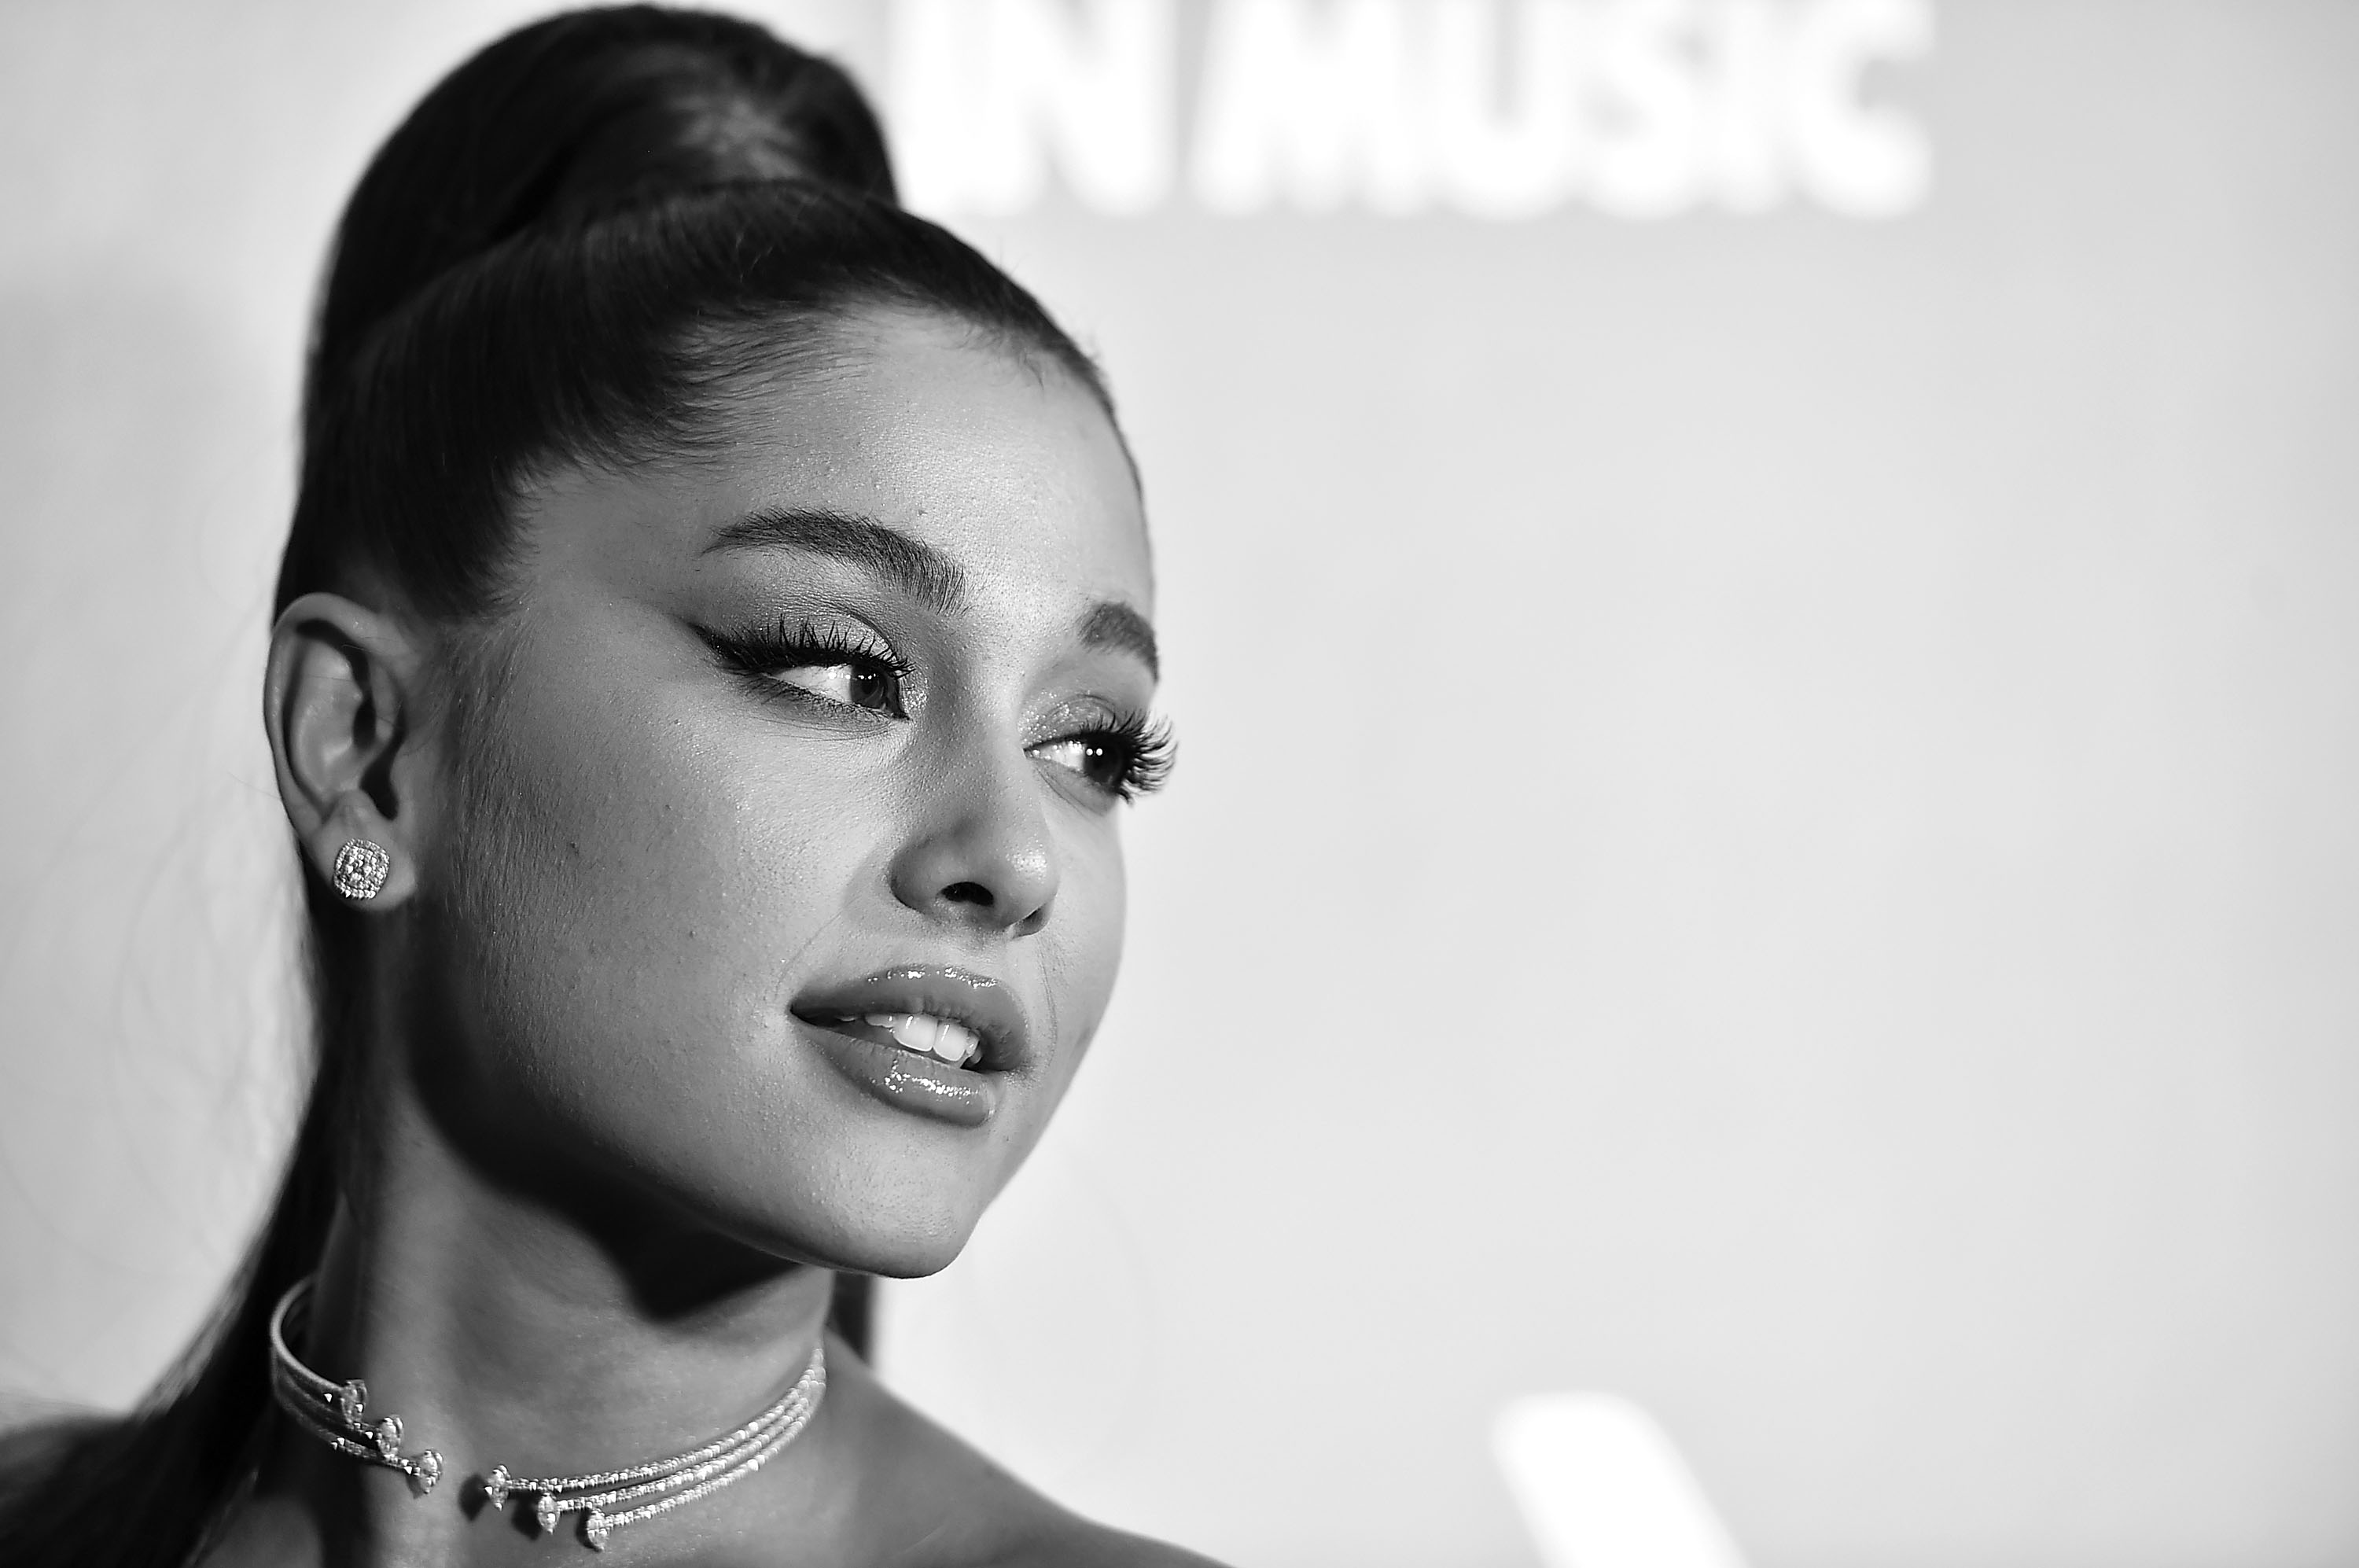 Ariana Grande Fans Are Boycotting “7 Rings” To Boost Other “Thank U, Next” Tracks